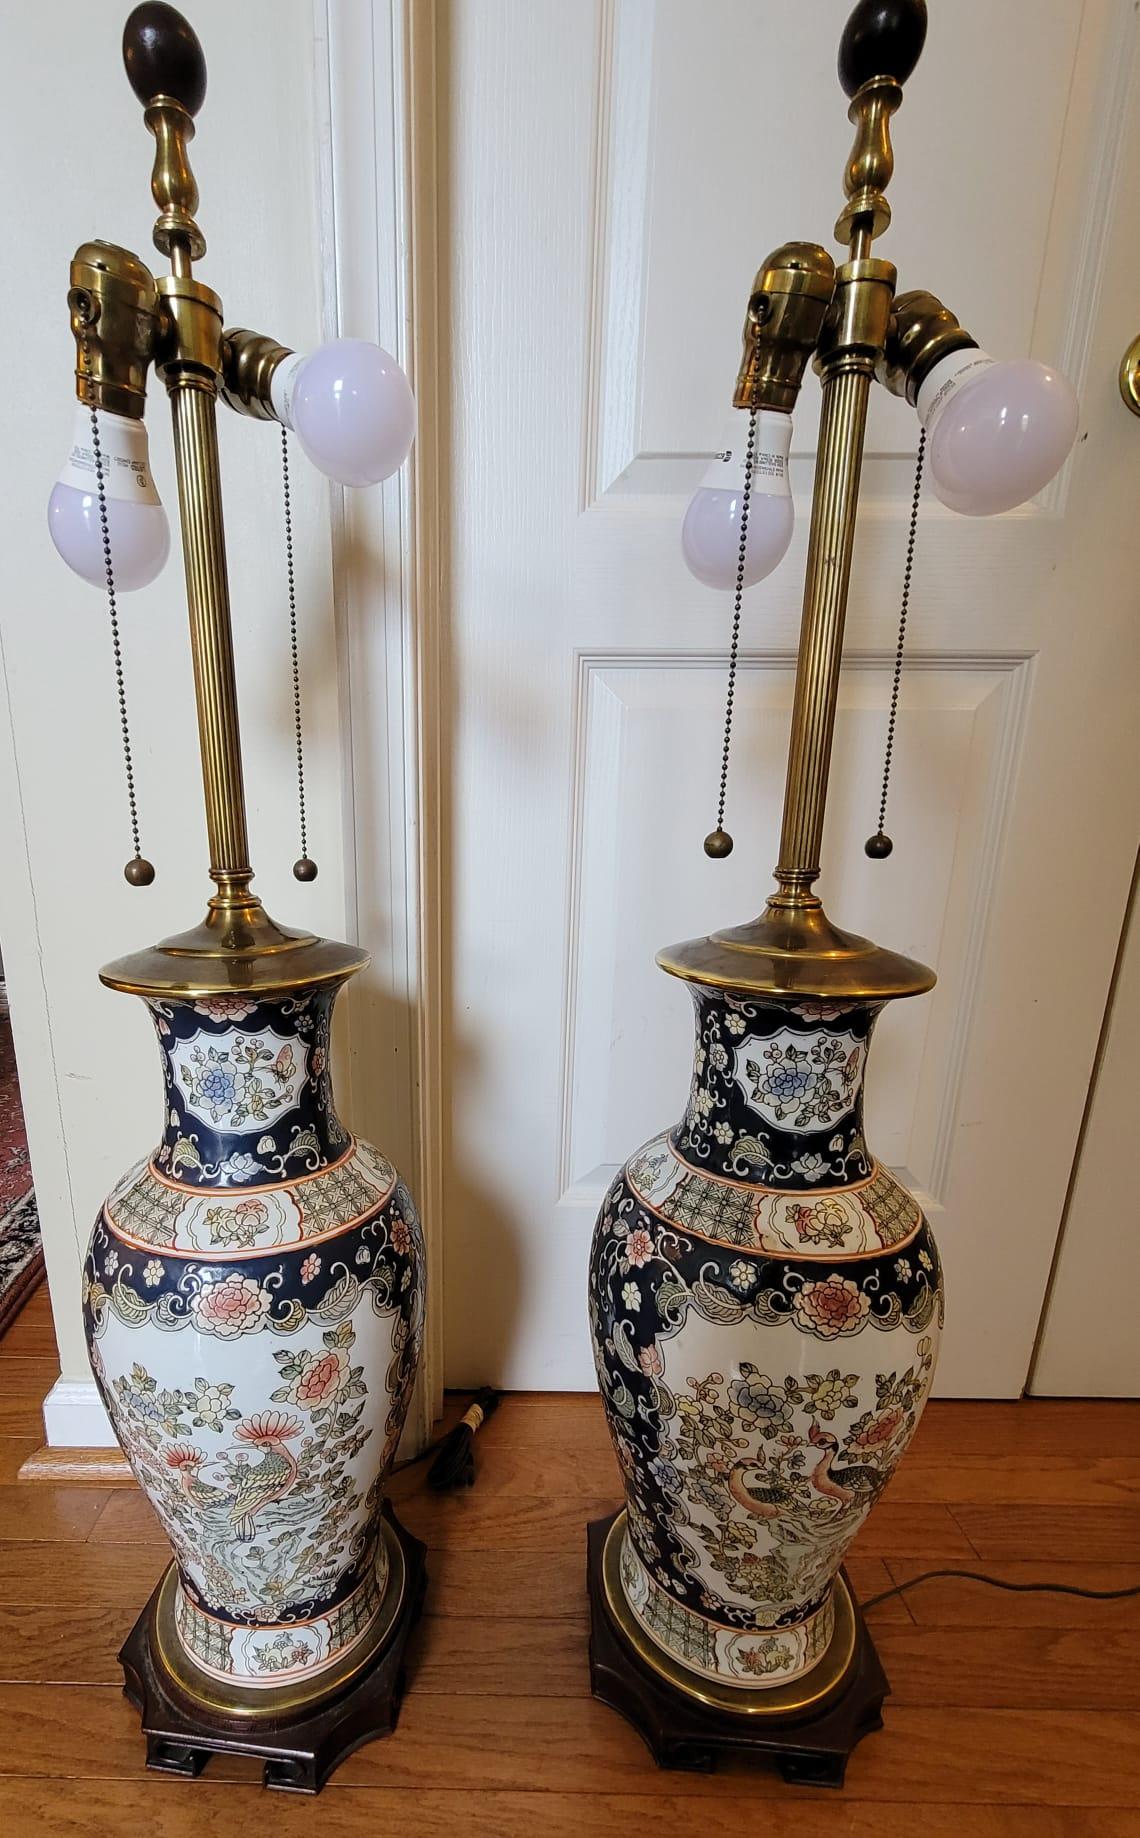 Pair of large Chinese peacock enameled decorated porcelain vases mounted as lamps. Measure 8inches in diameter and stand 39